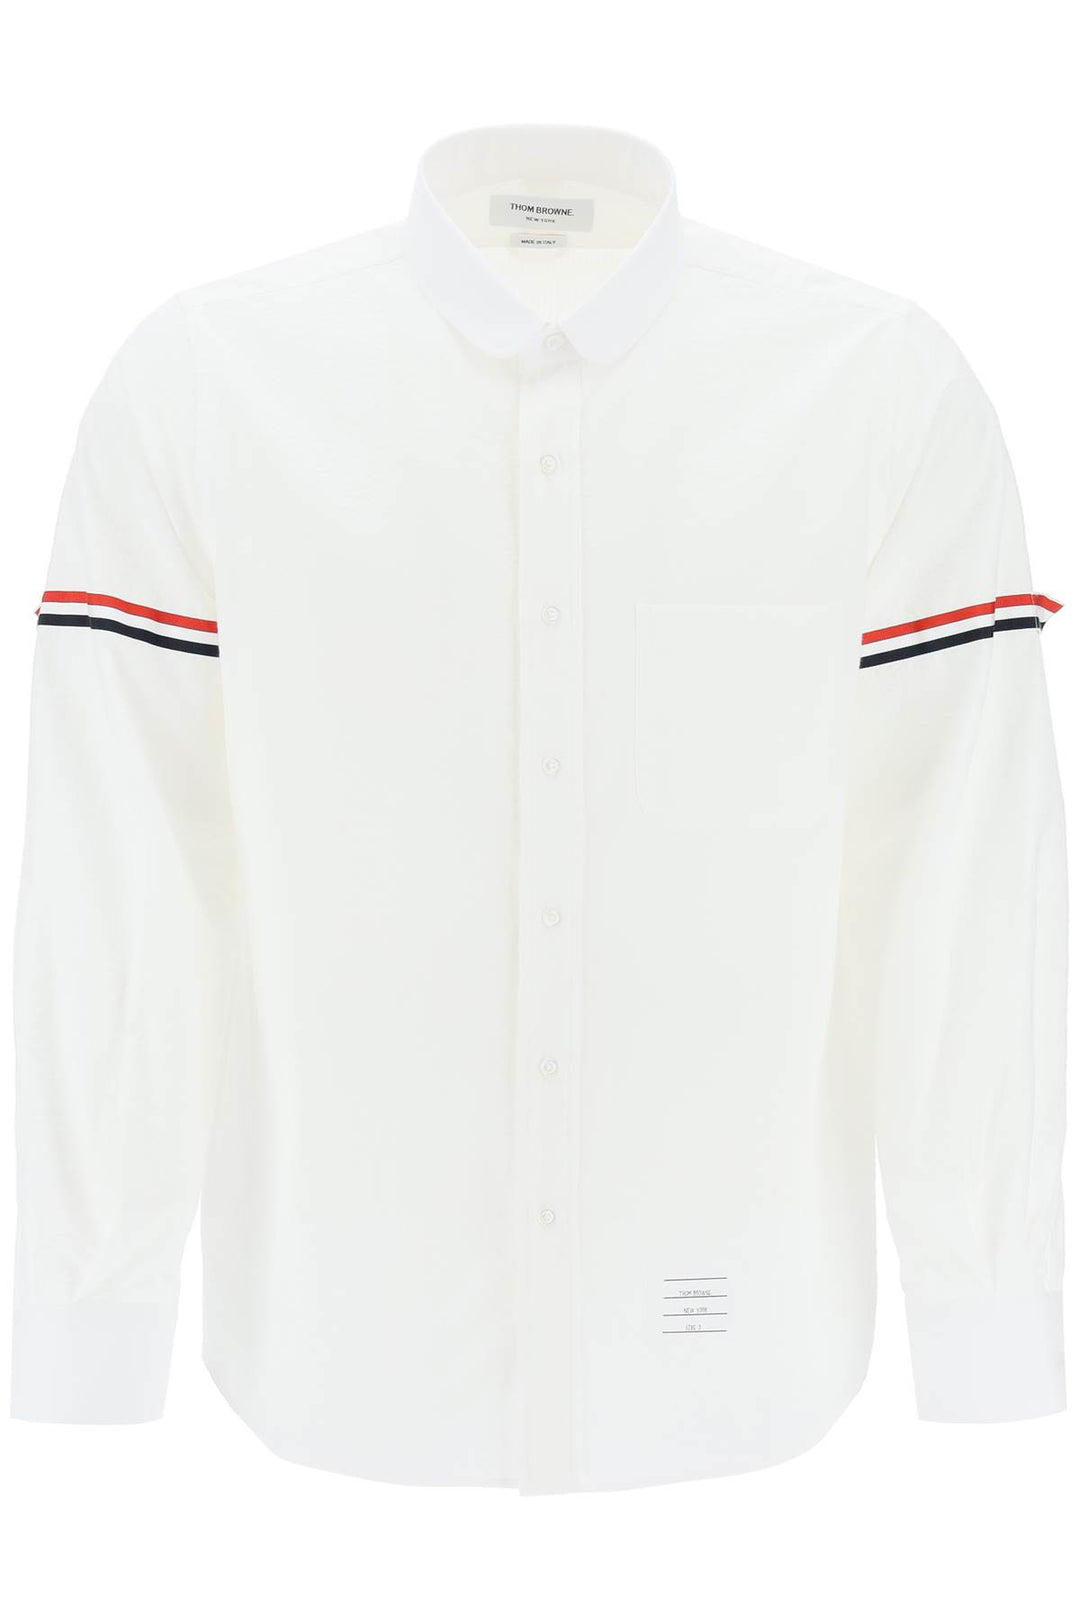 Thom browne seersucker shirt with rounded collar-0